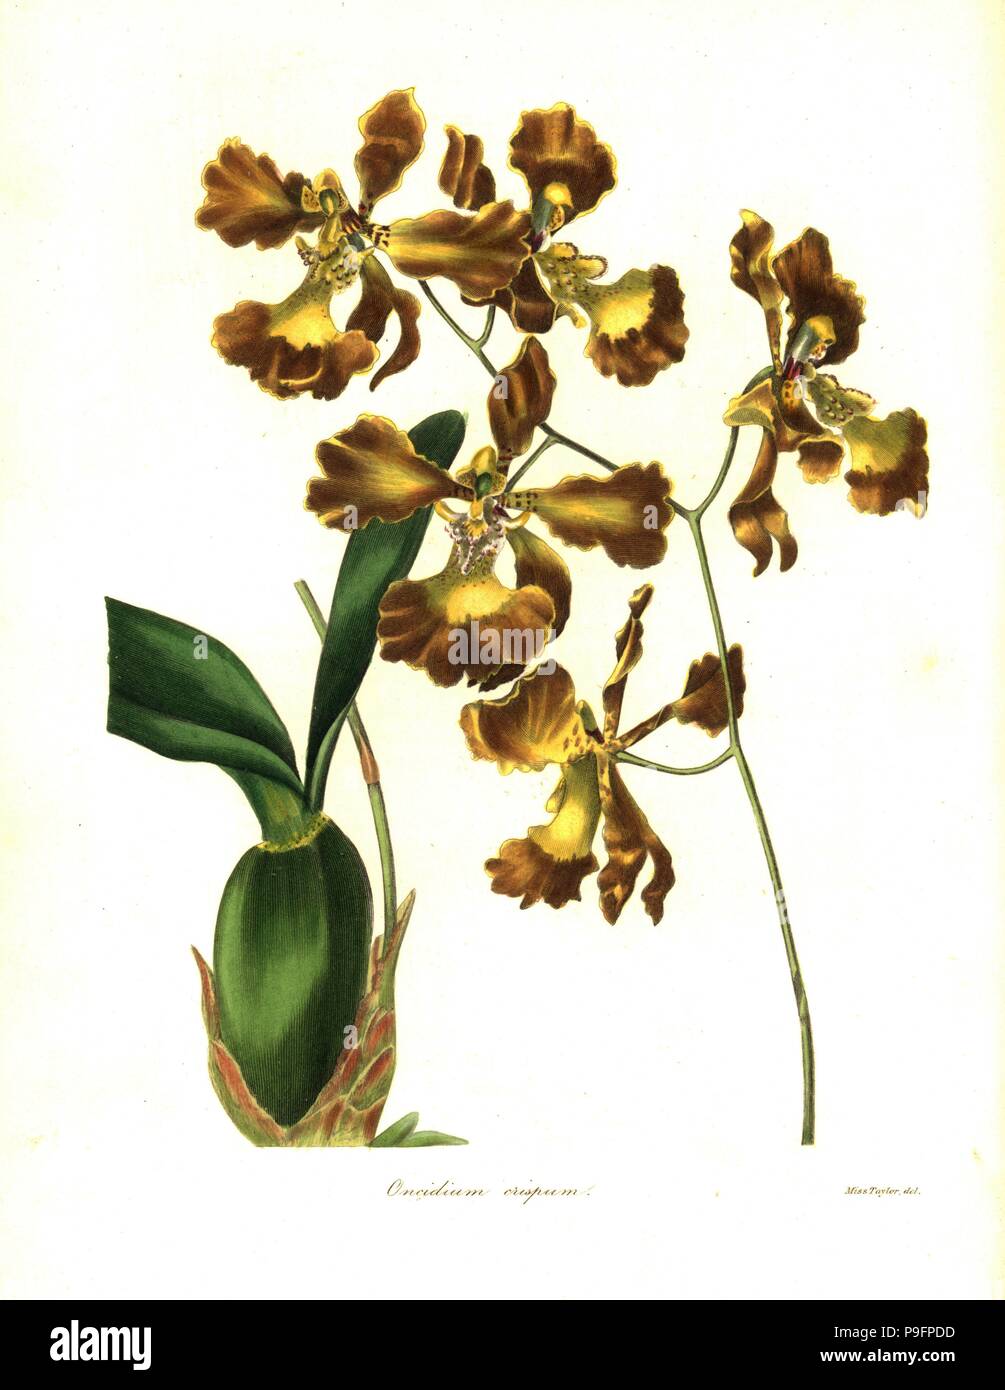 Crisped-flowered oncidium orchid, Oncidium crispum.Handcoloured copperplate engraving after a botanical illustration by Miss Jane Taylor from Benjamin Maund and the Rev. John Stevens Henslow's The Botanist, London, 1836. Stock Photo